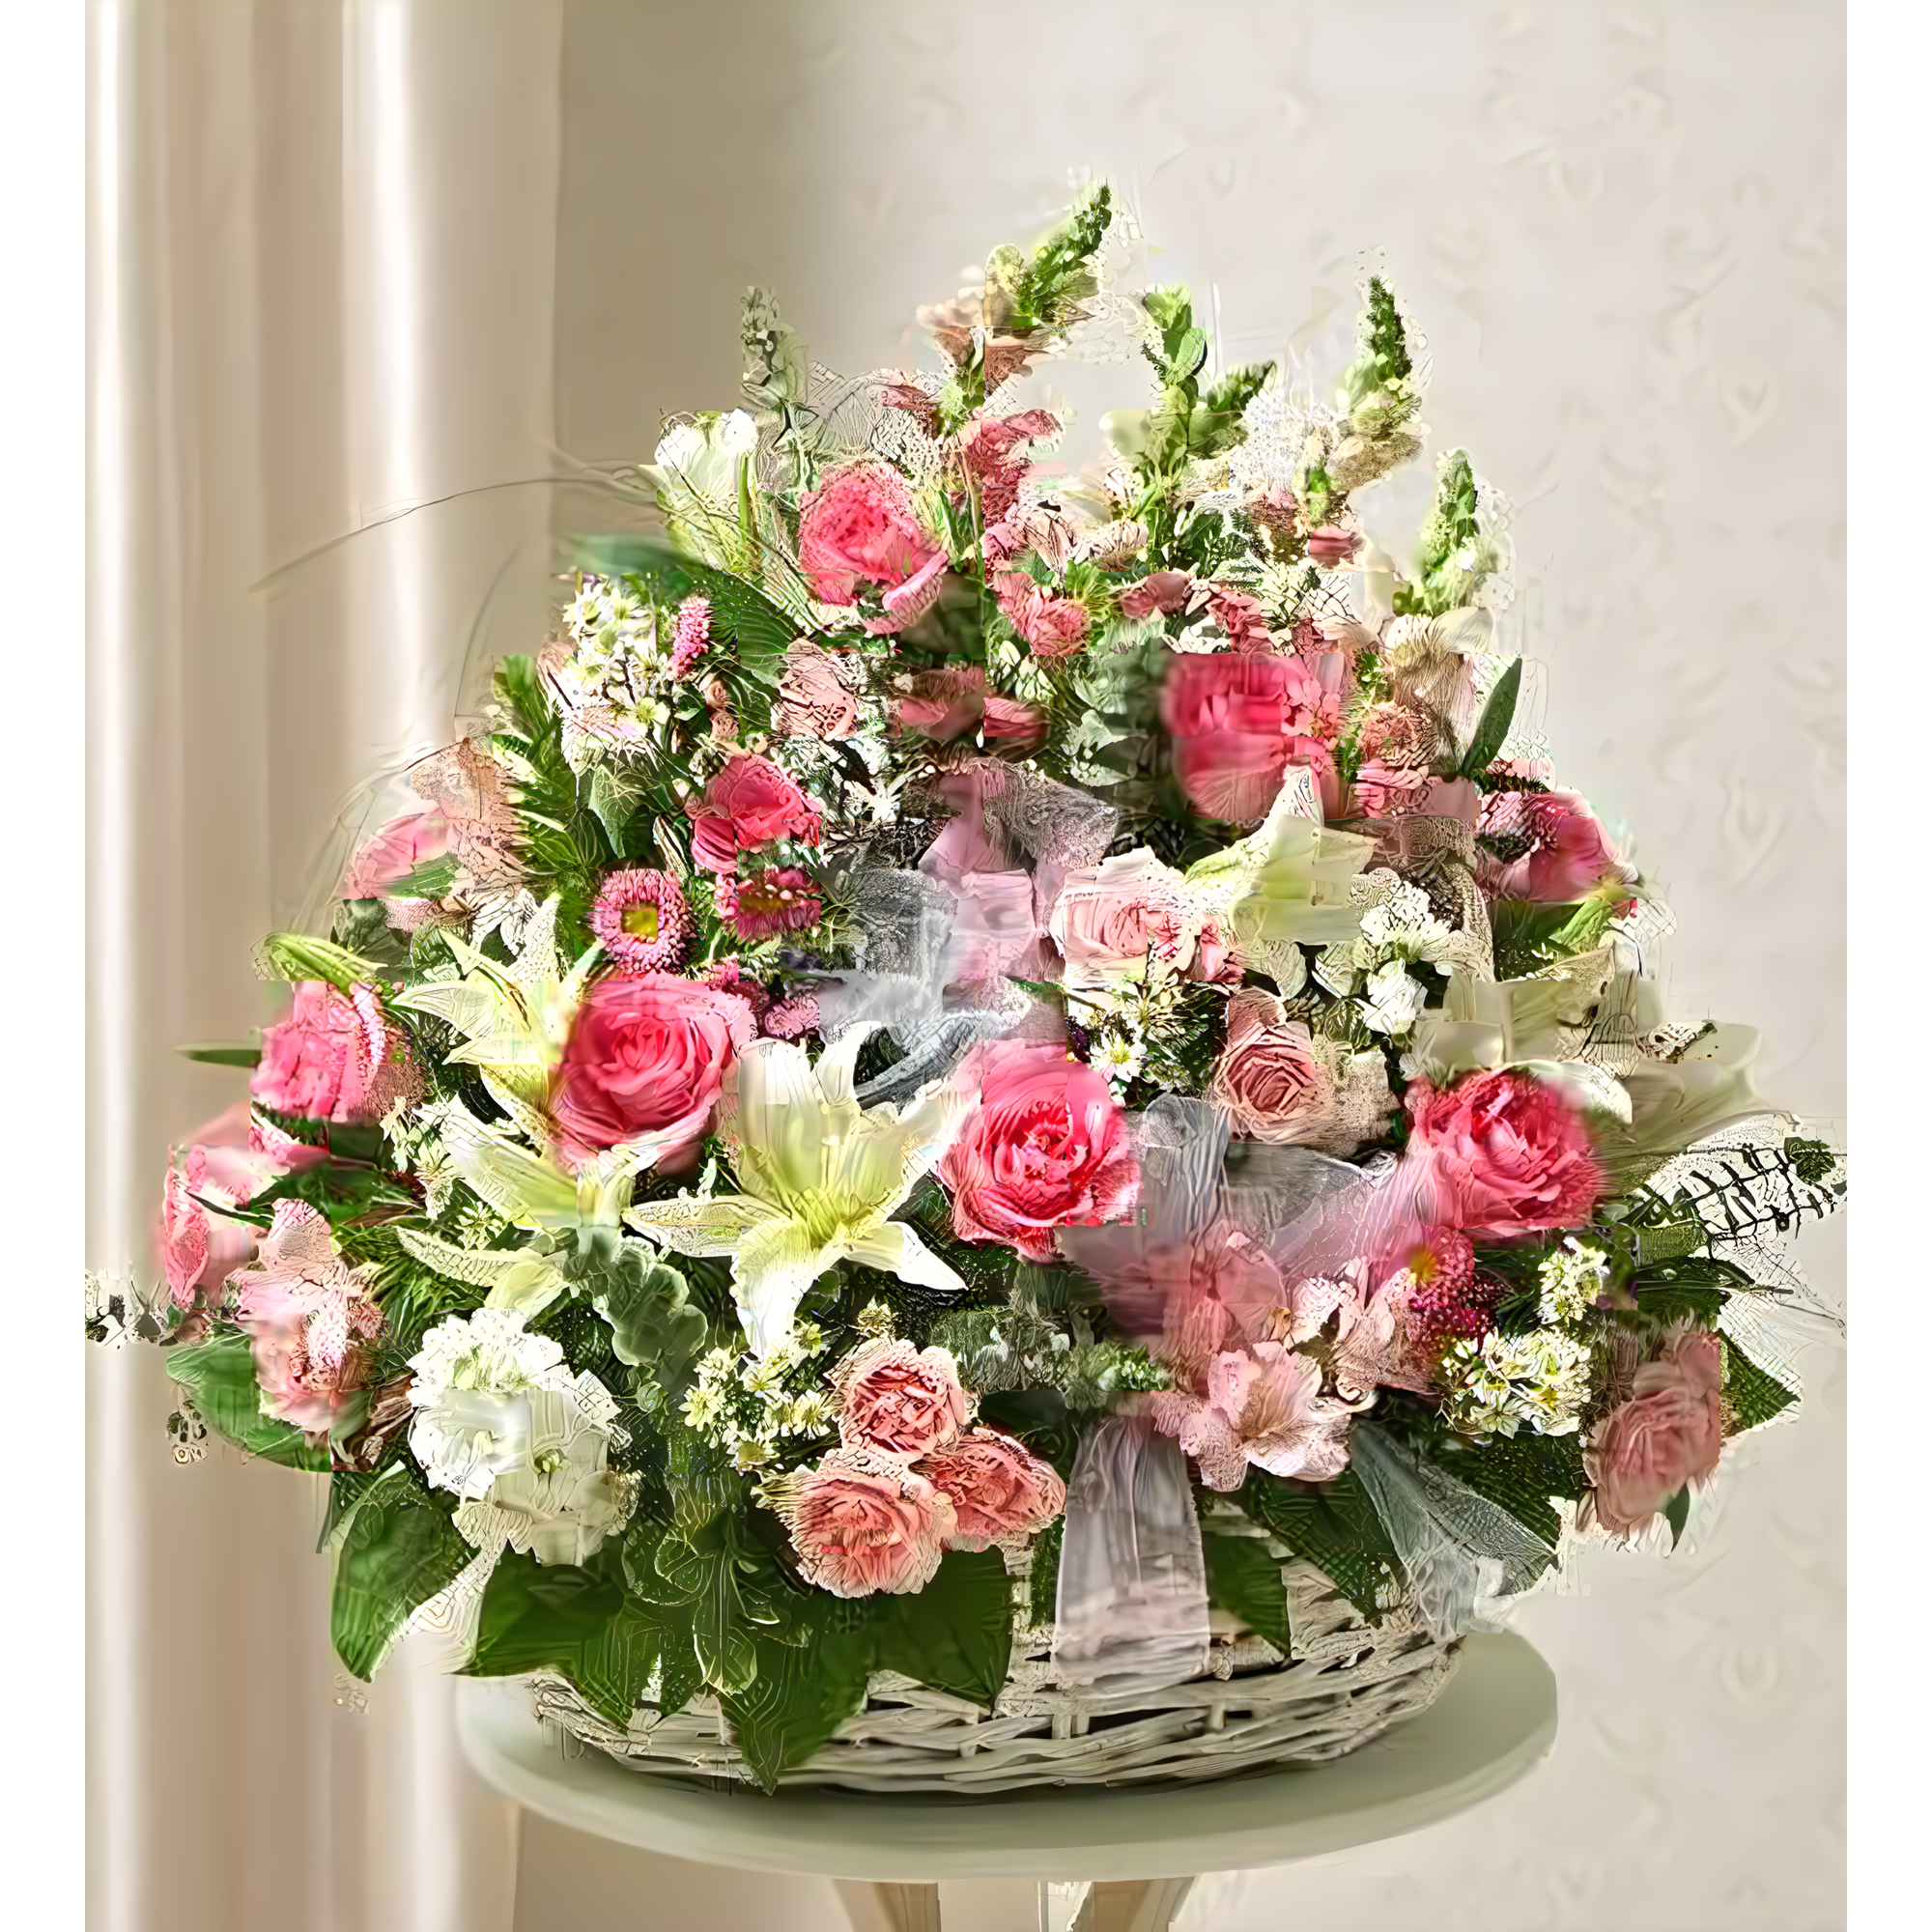 Manhattan Flower Delivery - Pink and White Sympathy Arrangement in Basket - Funeral > For the Service